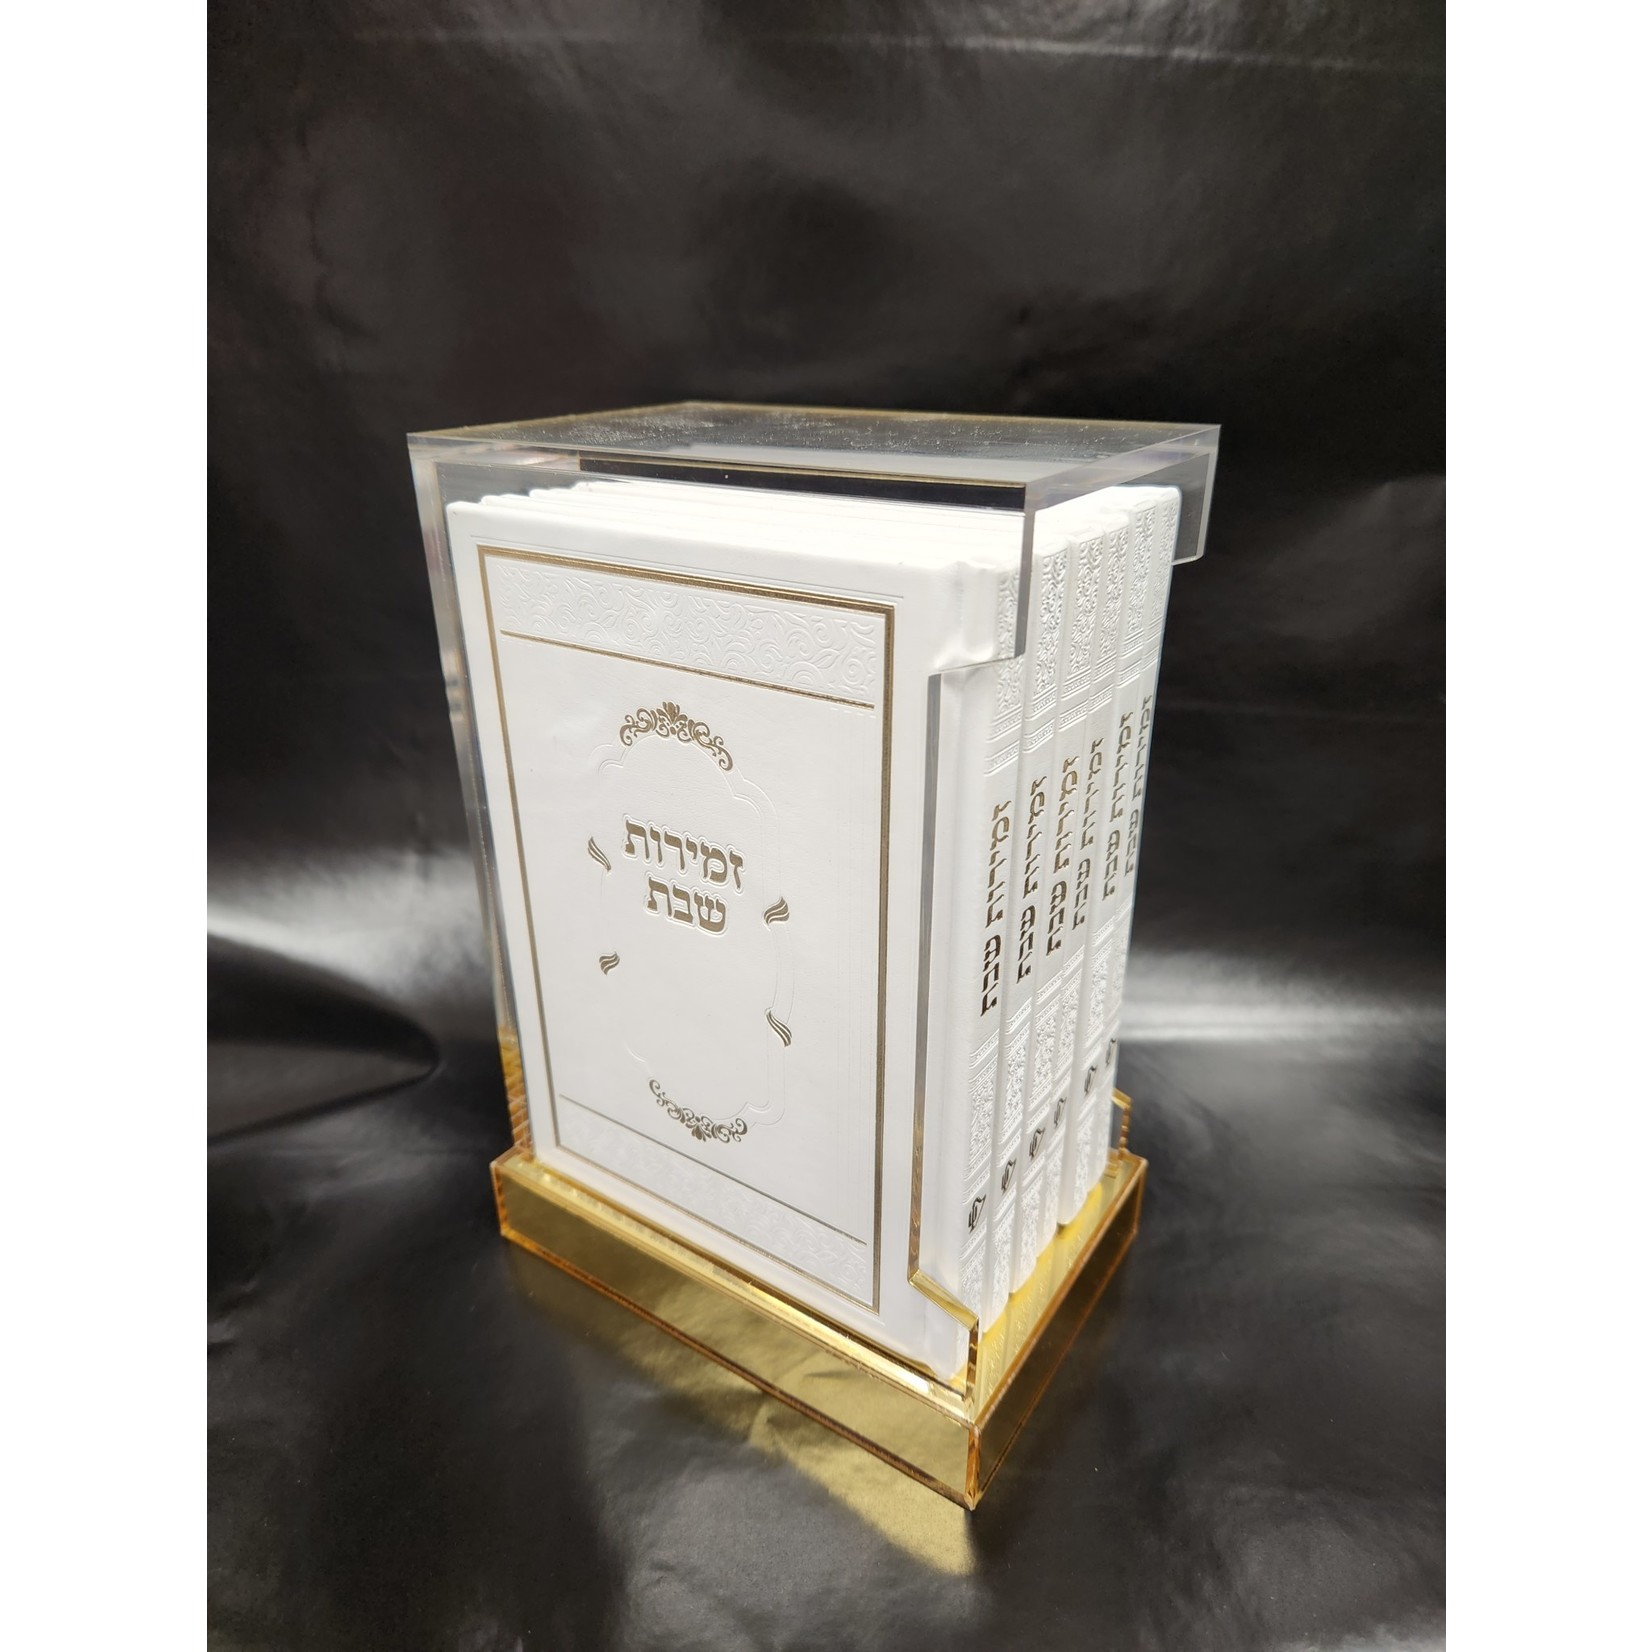 TWS J-MBHL-W-GD Lucite White Matches Box Holder Gold - The Westview Shop